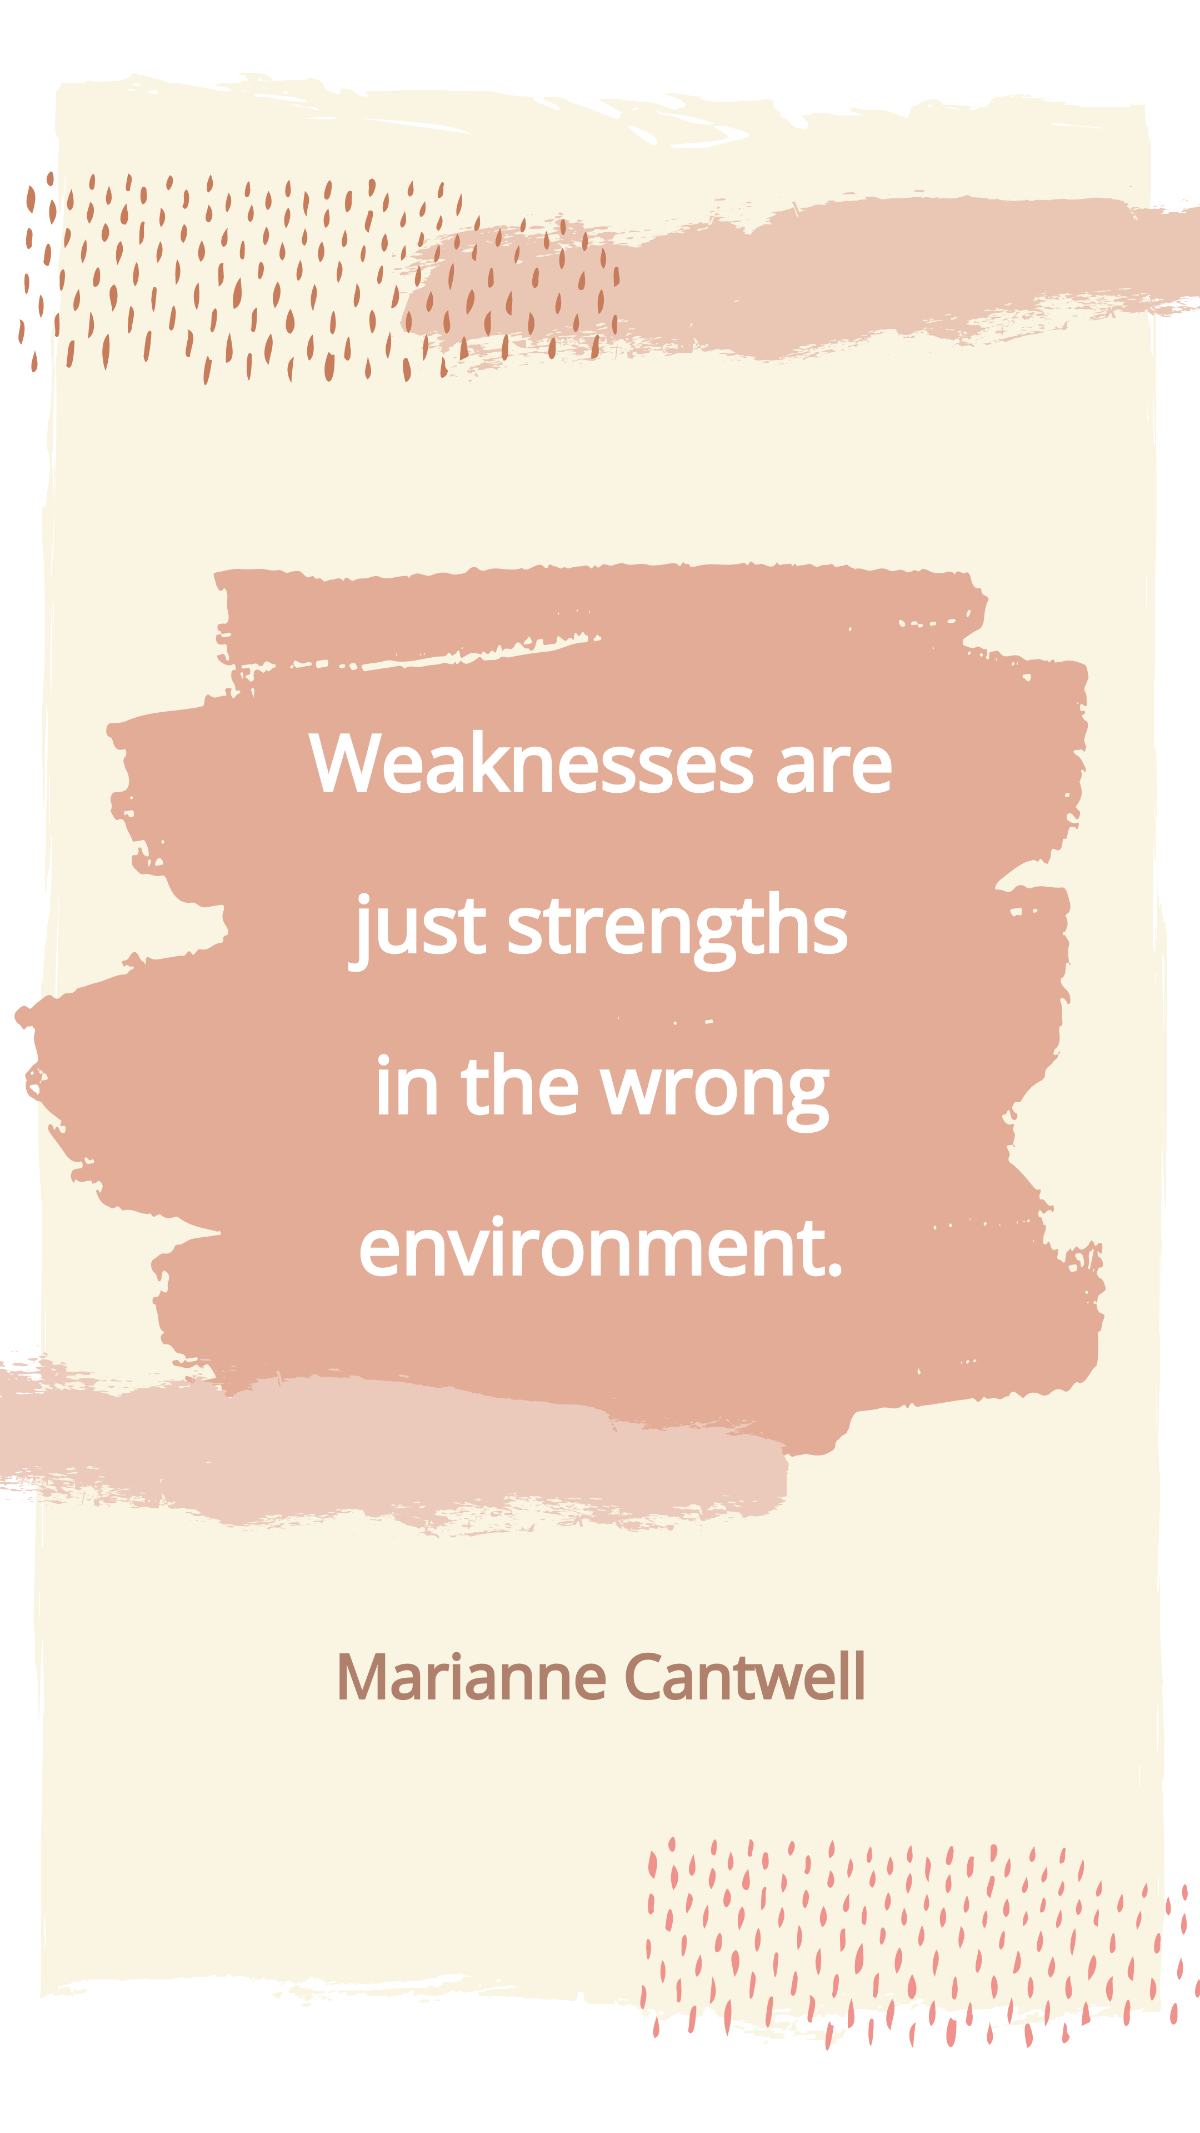 Marianne Cantwell - Weaknesses are just strengths in the wrong environment. Template